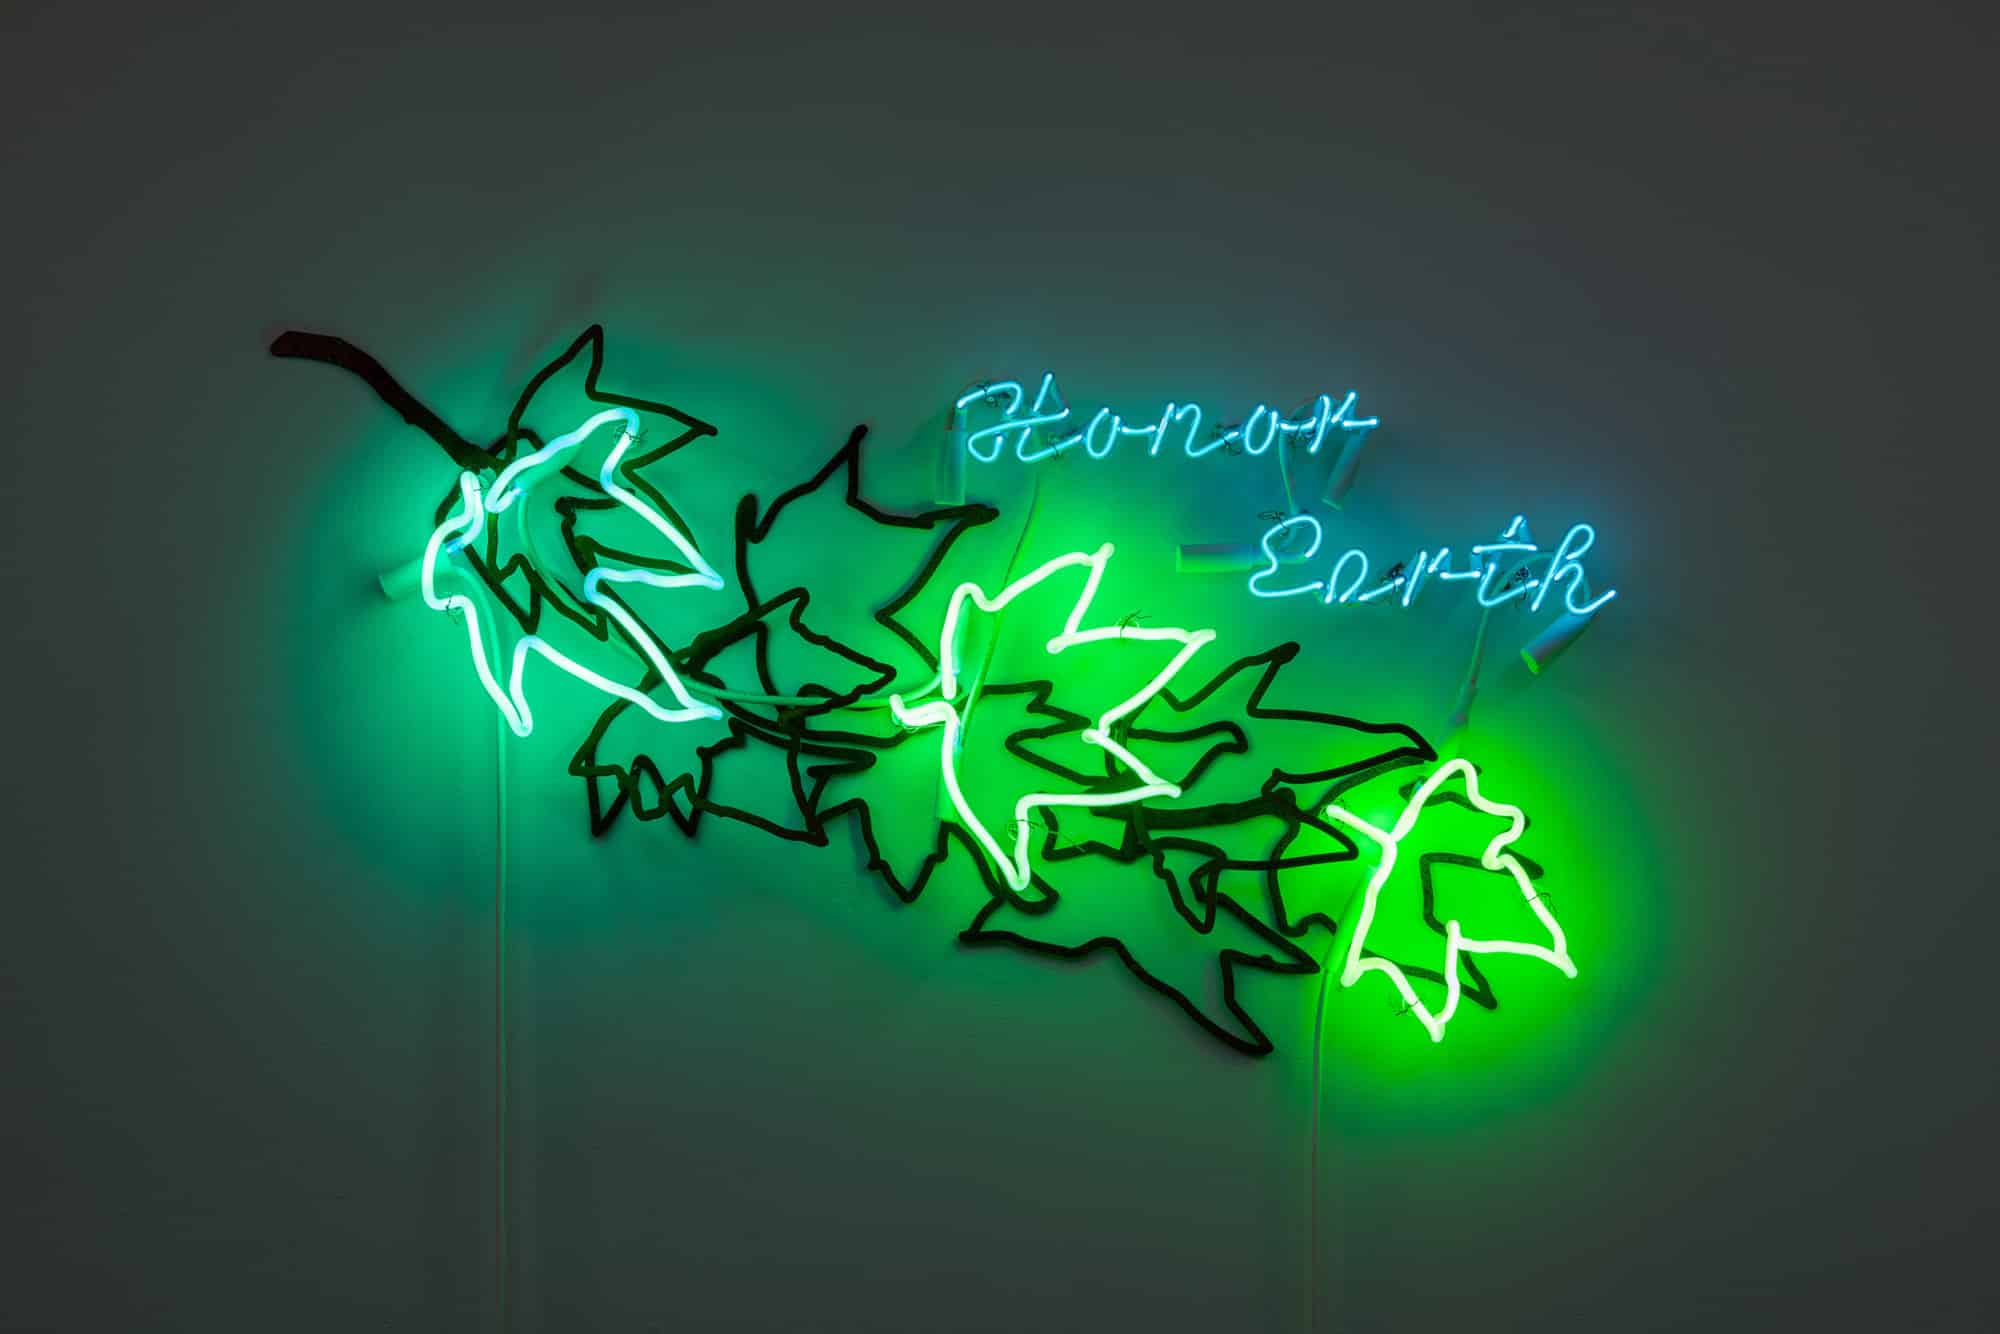 Light mounted Artwork by Andrea Bowers (CalArts '92)